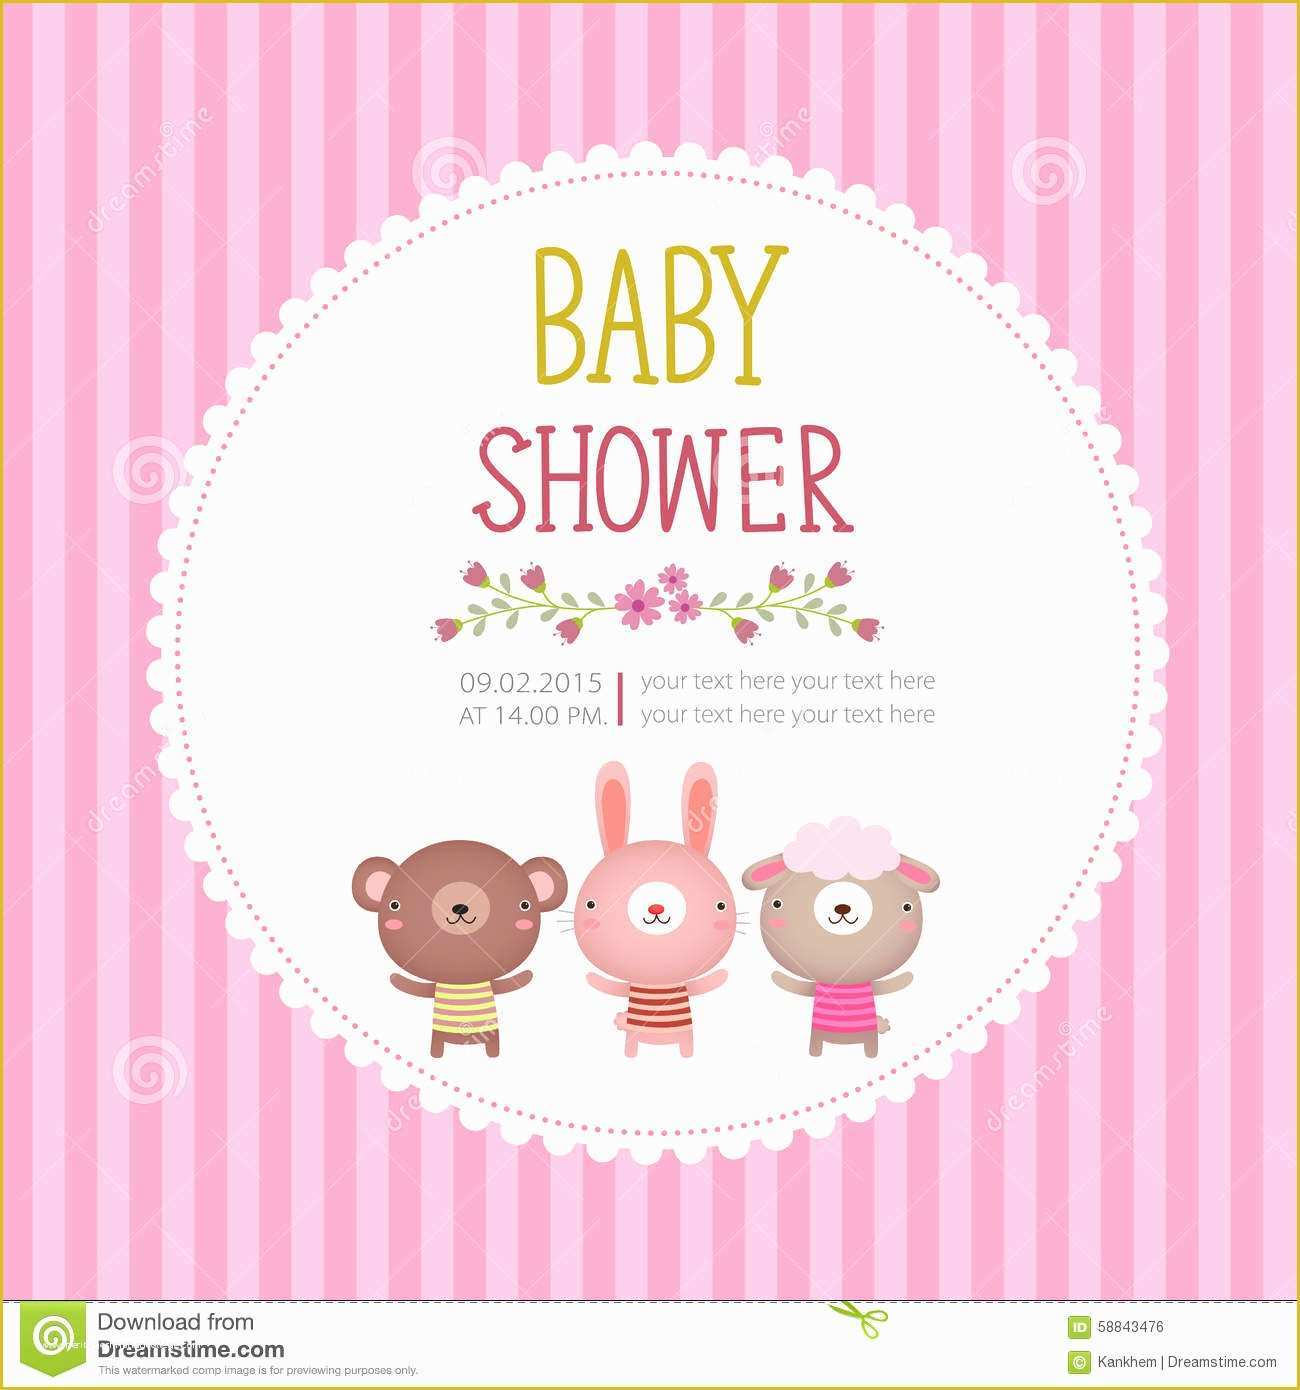 Baby Shower Invitation Card Template Free Download Of Baby Shower Invitation Card Template Free Download